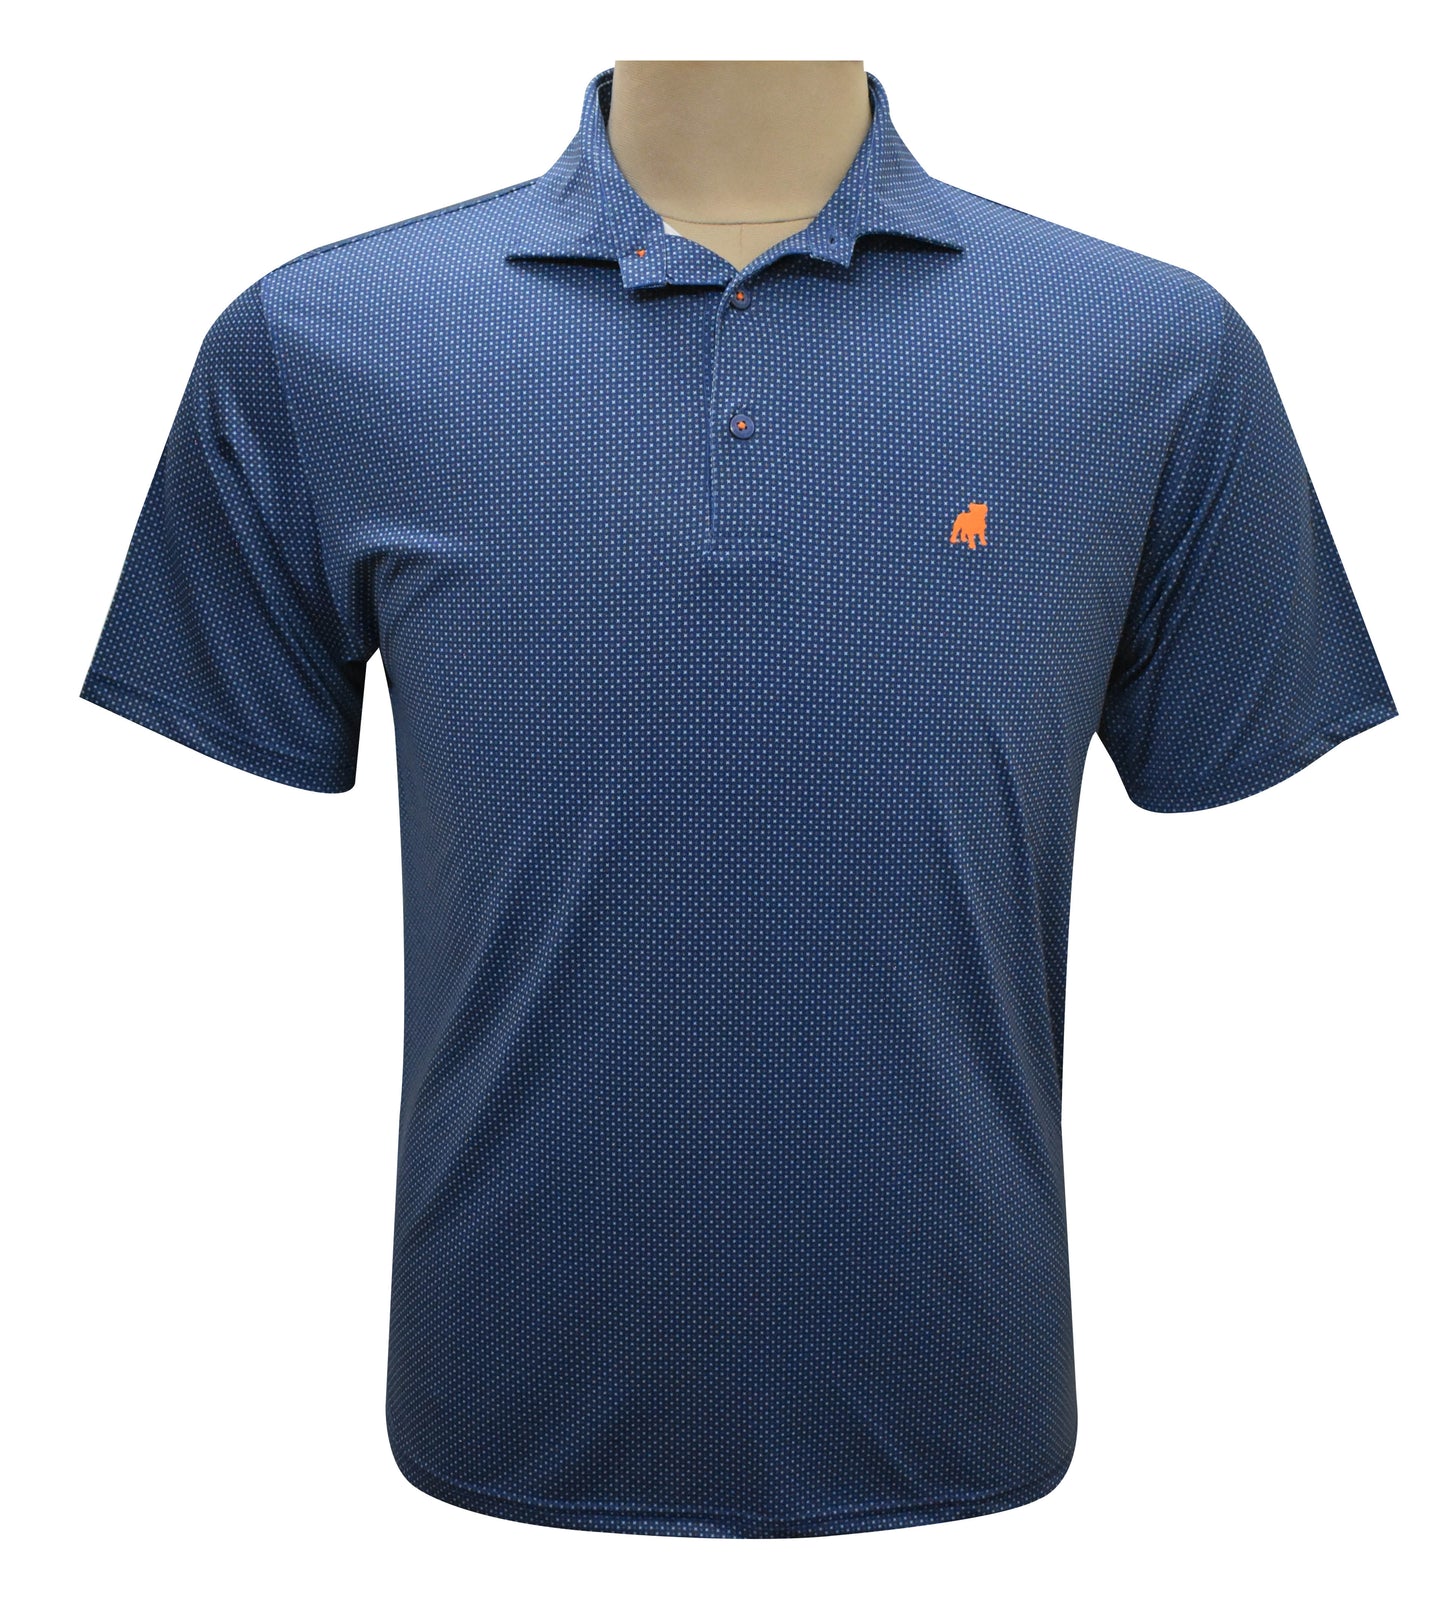 Navy Checkered Polo by Horn Legend